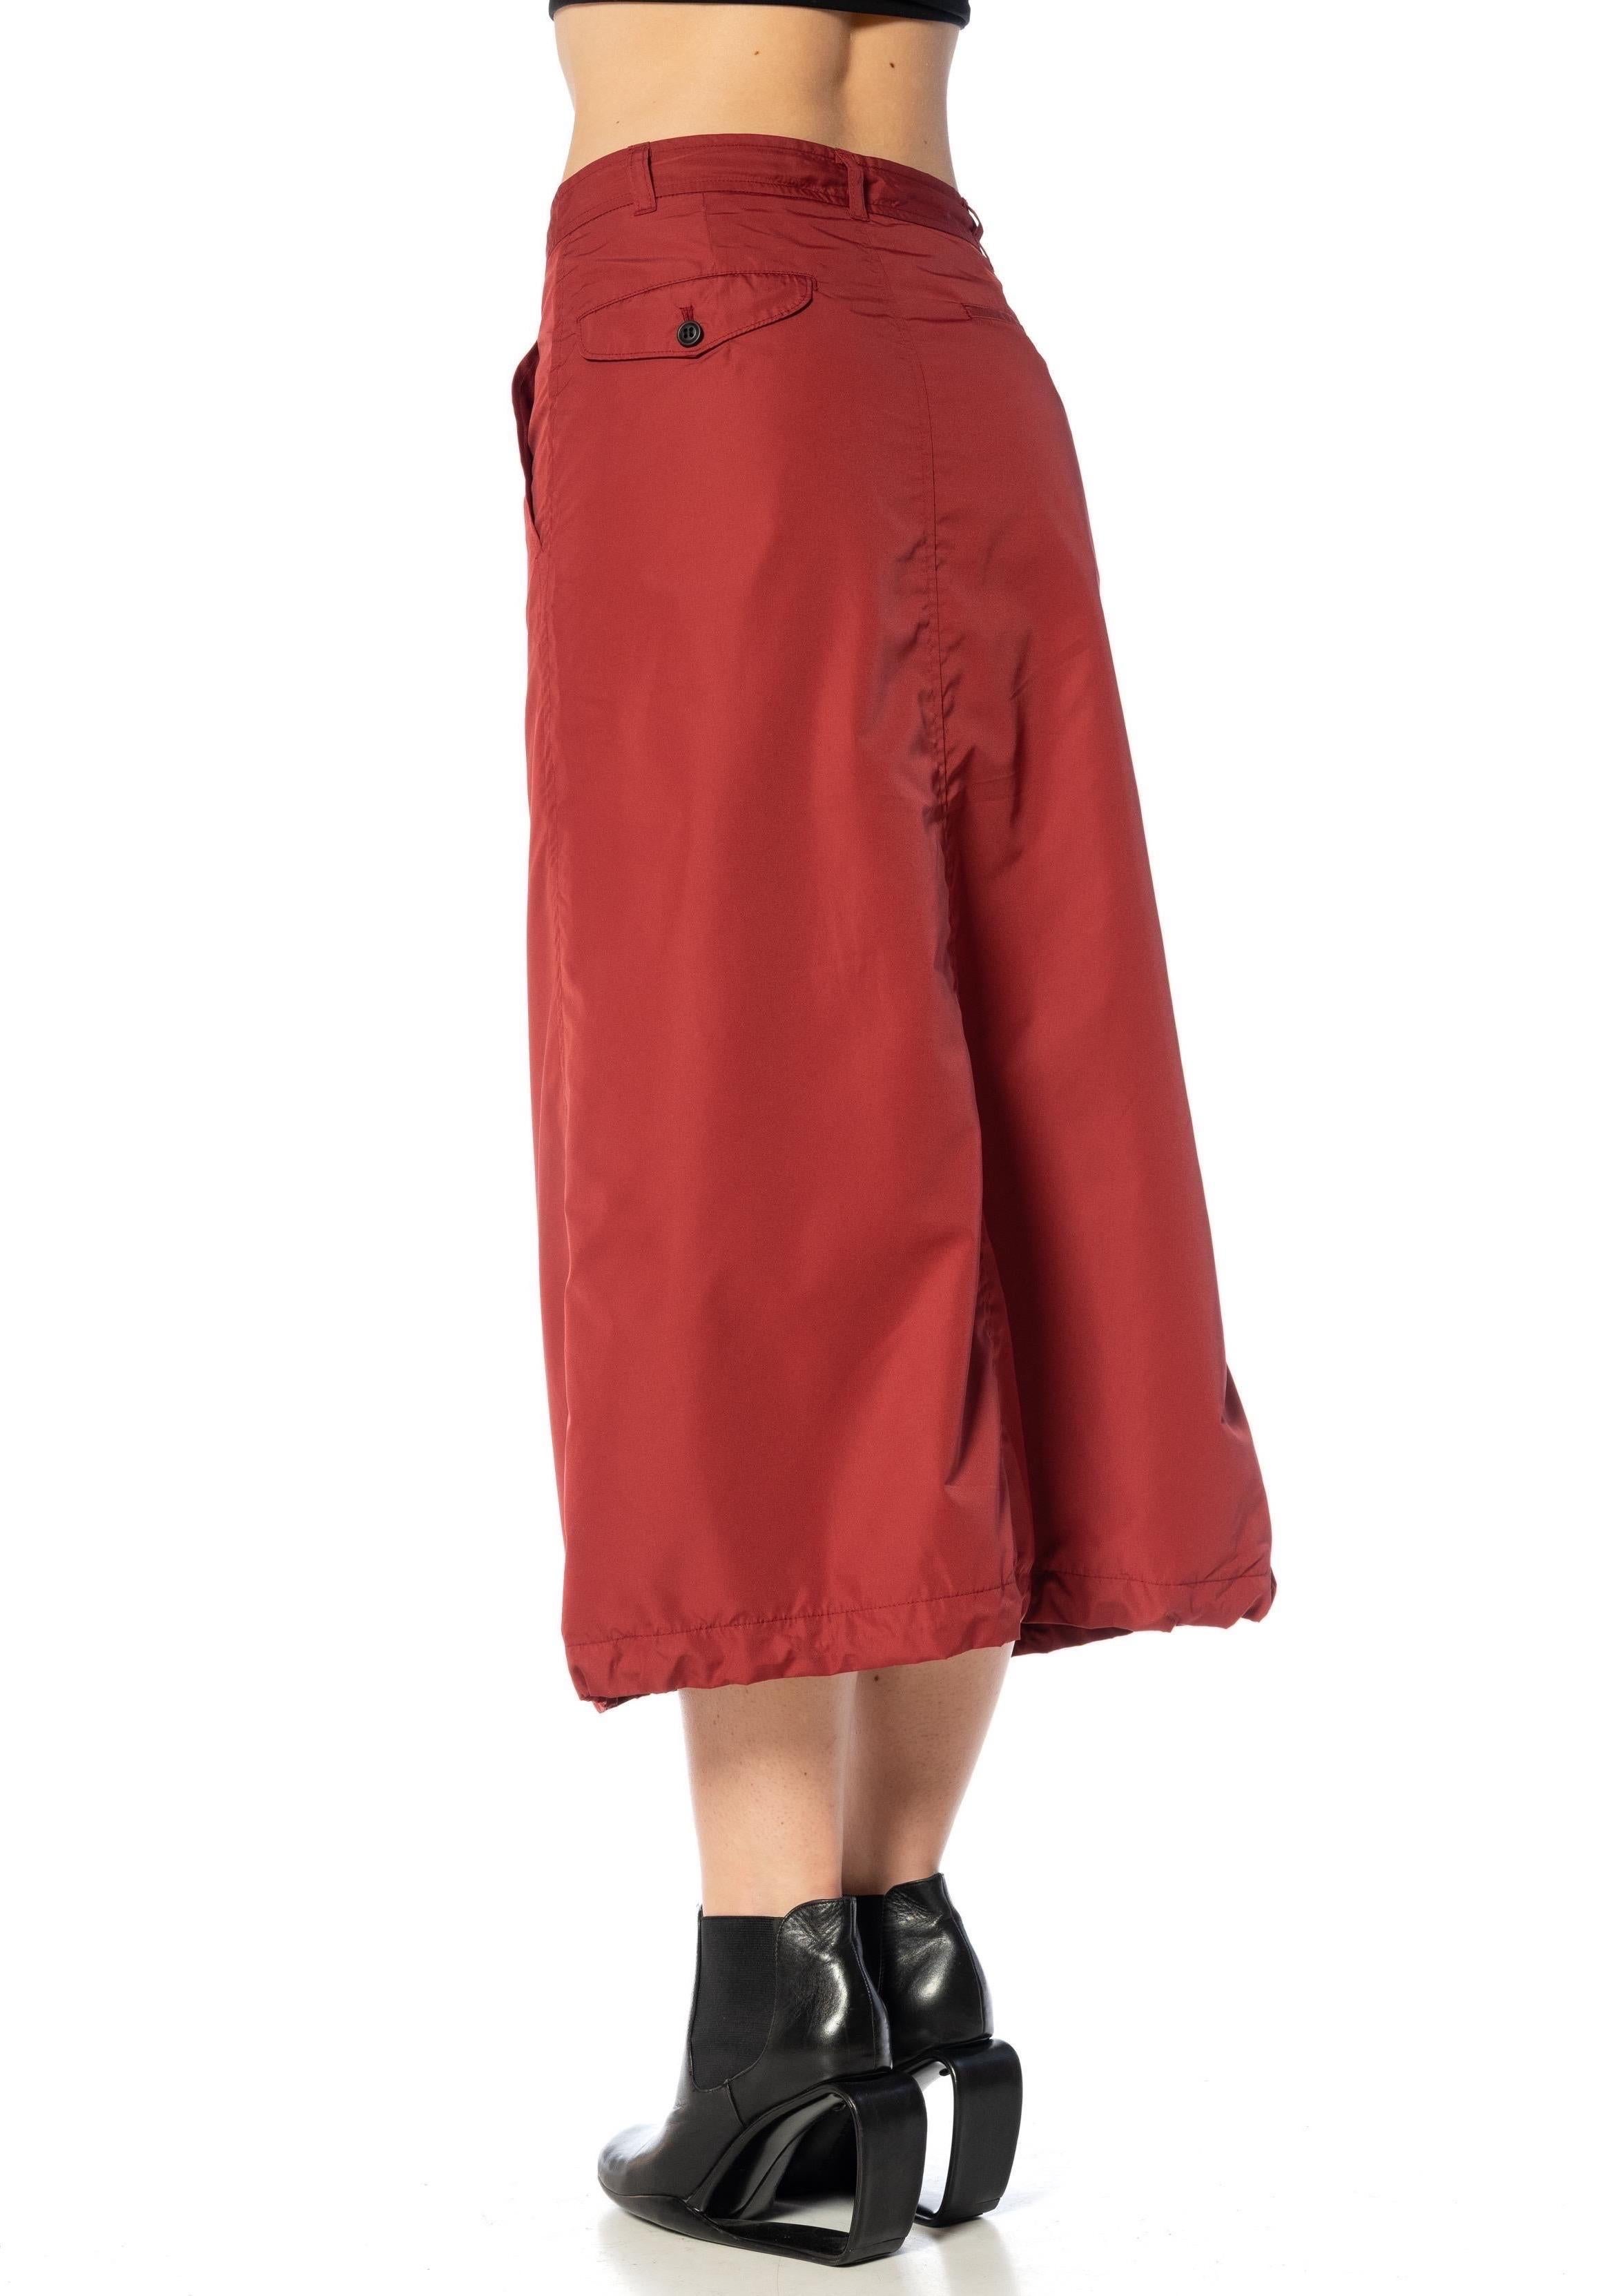 2000S COMME DES GARCONS Burgundy Polyester Parachute Skirt With Drawstring Hem  For Sale 4